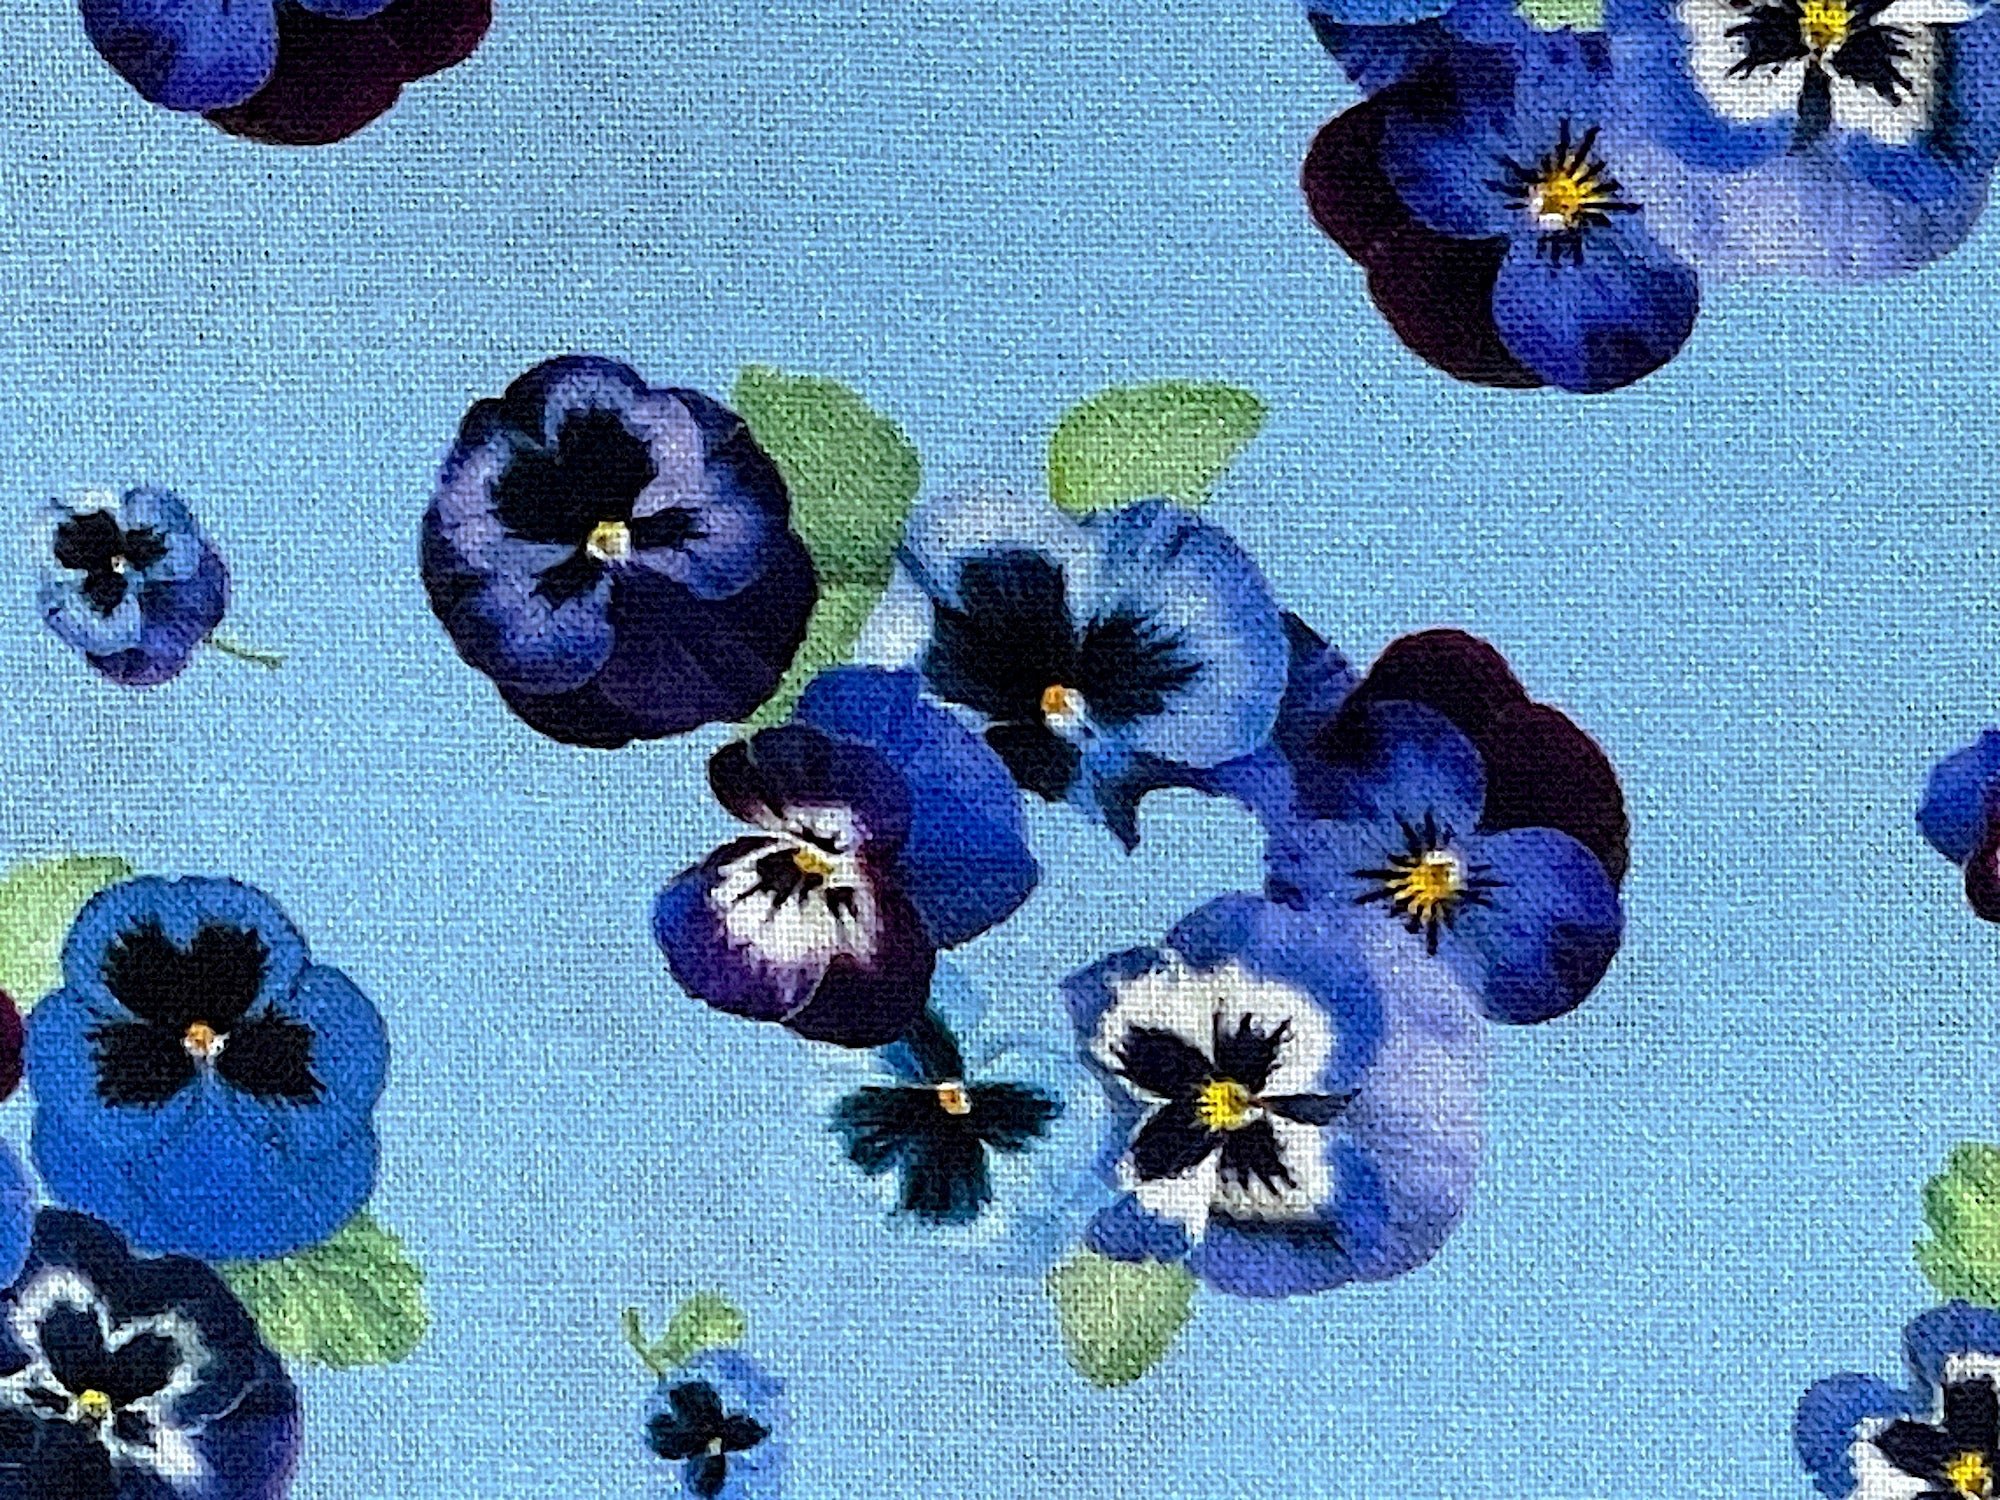 Close up of pansies that are a combination of blue, white,purple and yellow.